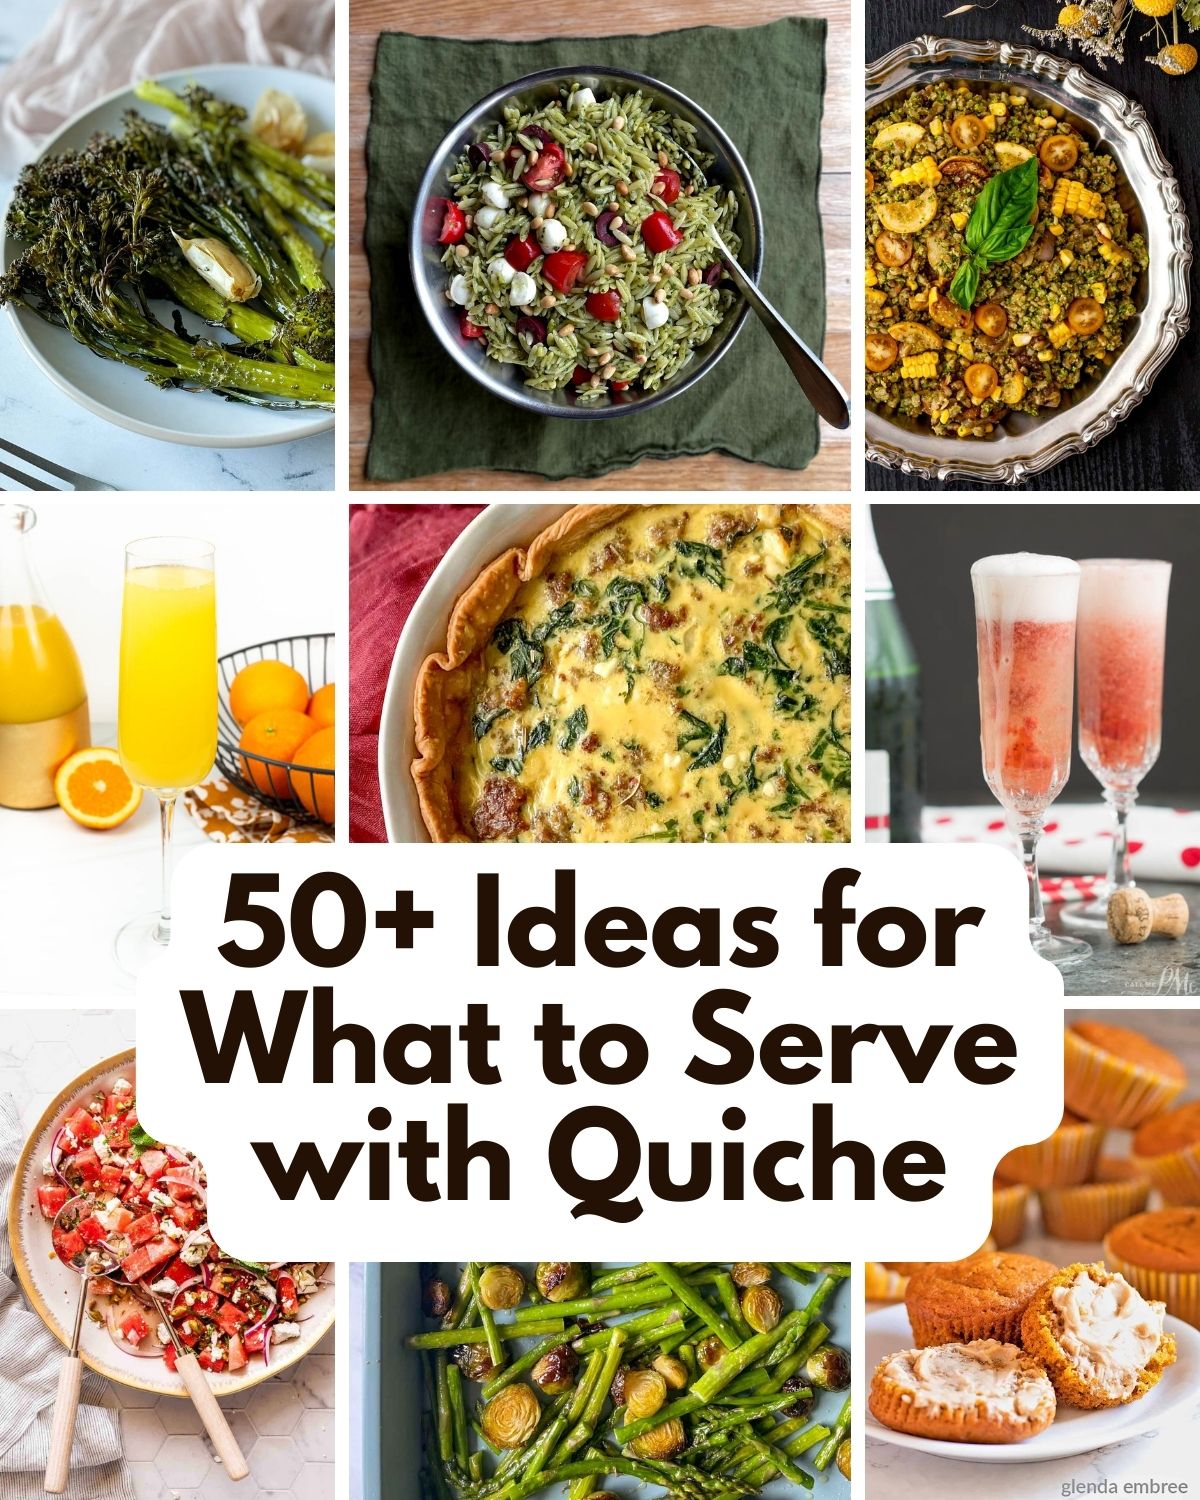 Nine colorful vegetable sides, baked goods, and drinks are shown in a collage with the words 50+ Ideas for What to Serve with Quiche.